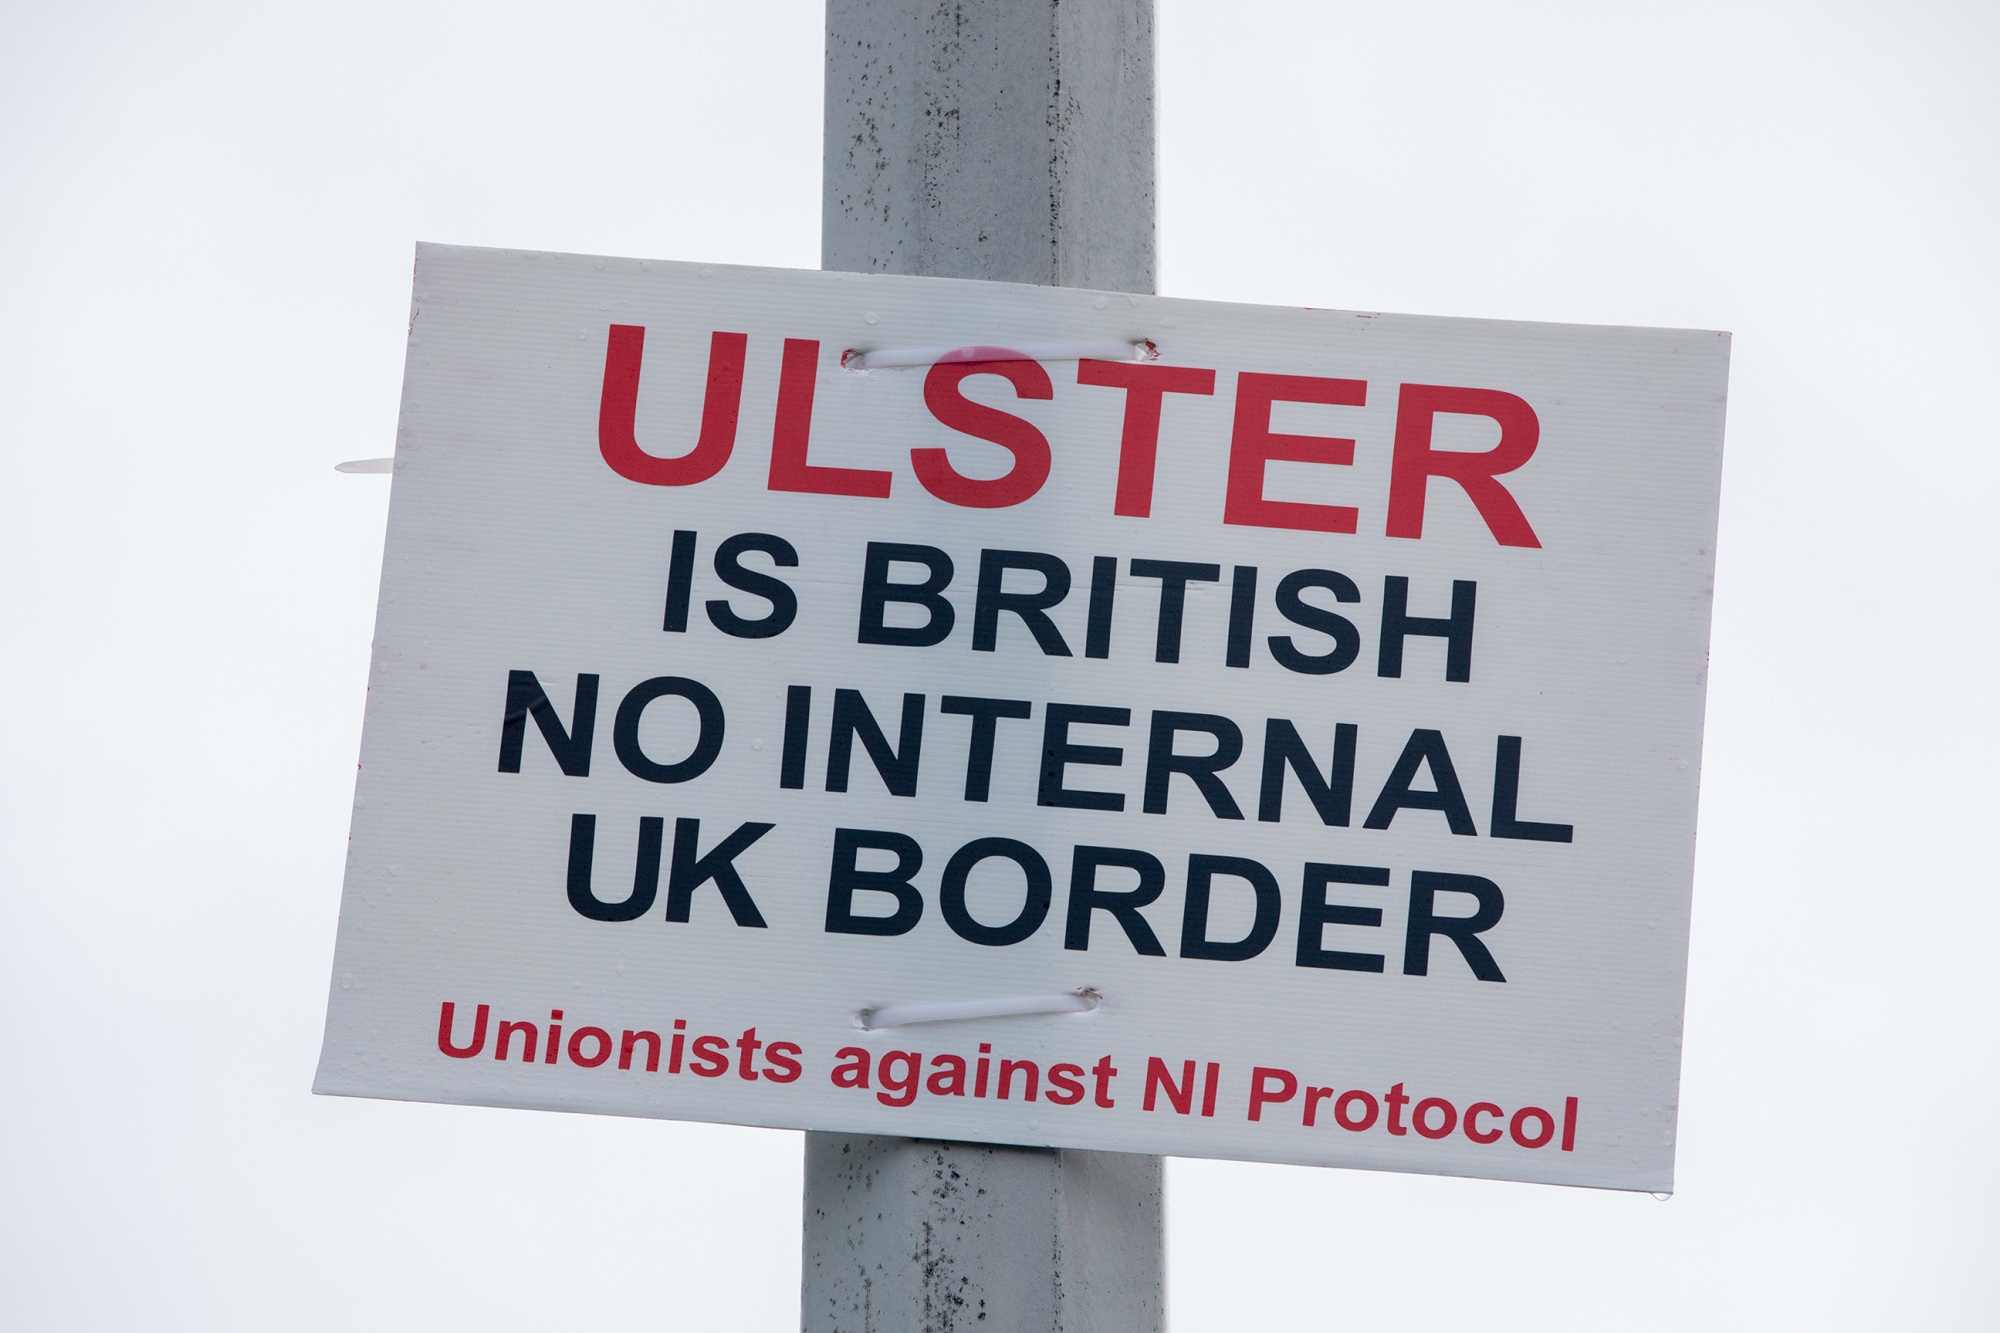 A placard on a lamppost near the Port of Larne in Larne, U.K., on Feb. 4.